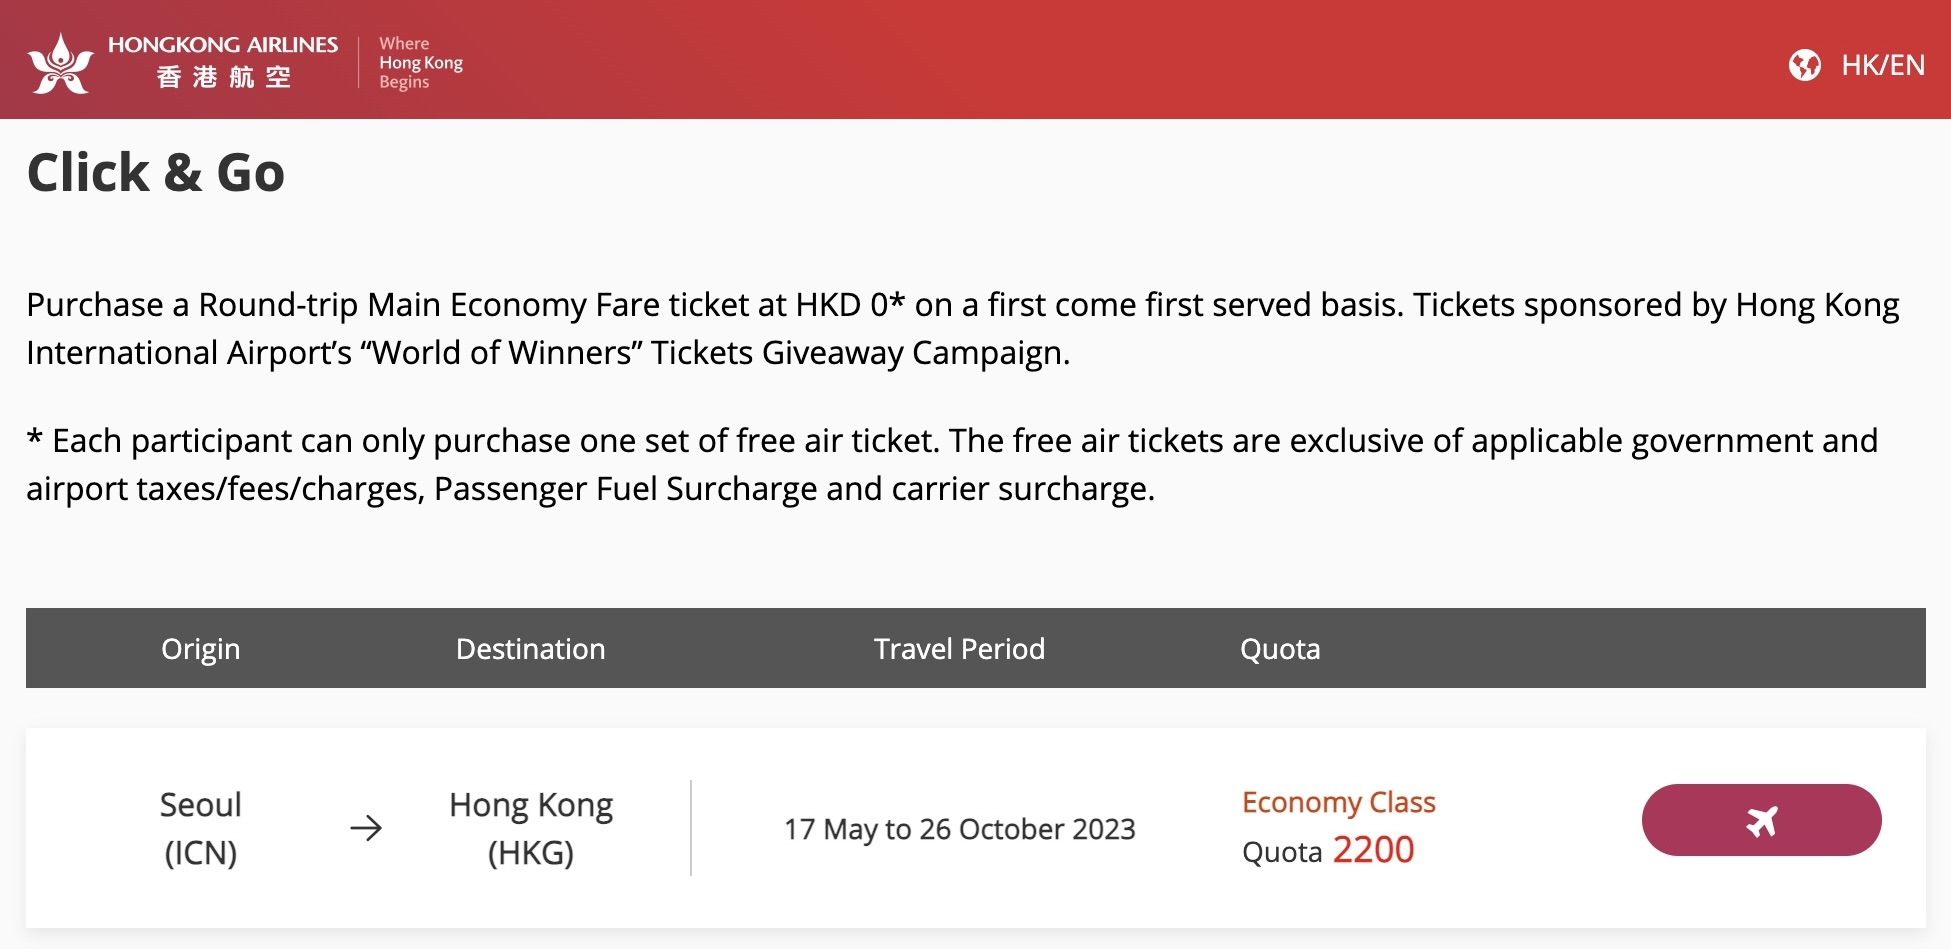 Hong Kong Airlines's Click & Go giveaway for tickets from Seoul.